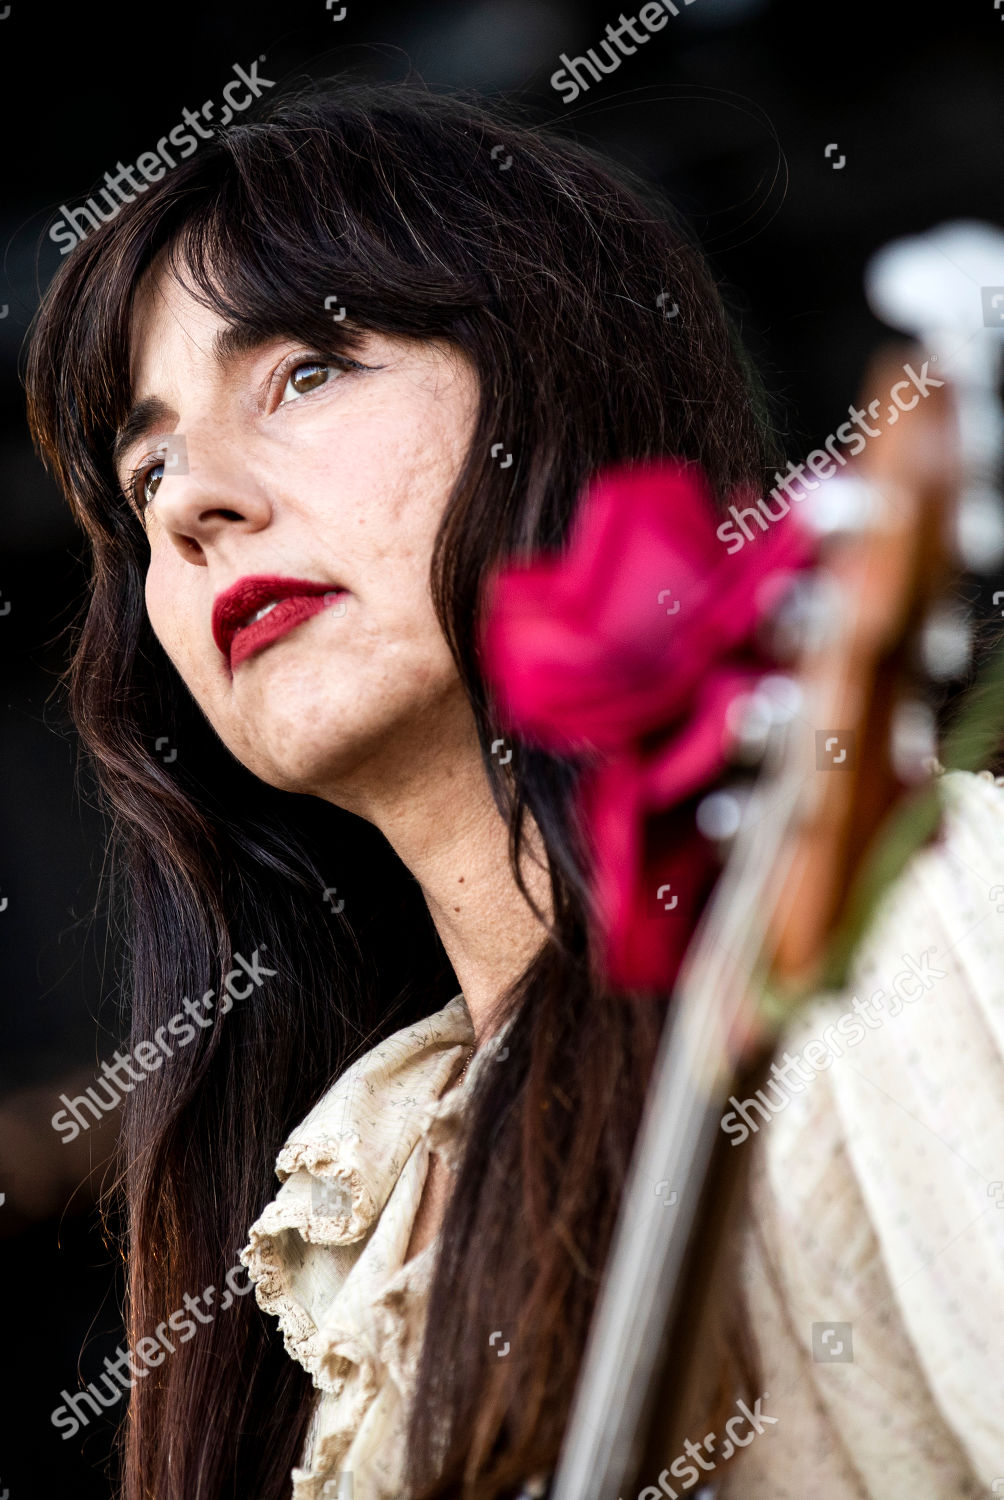 Paz Lenchantin Pixies Performs On Stage During Editorial Stock Photo Stock Image Shutterstock